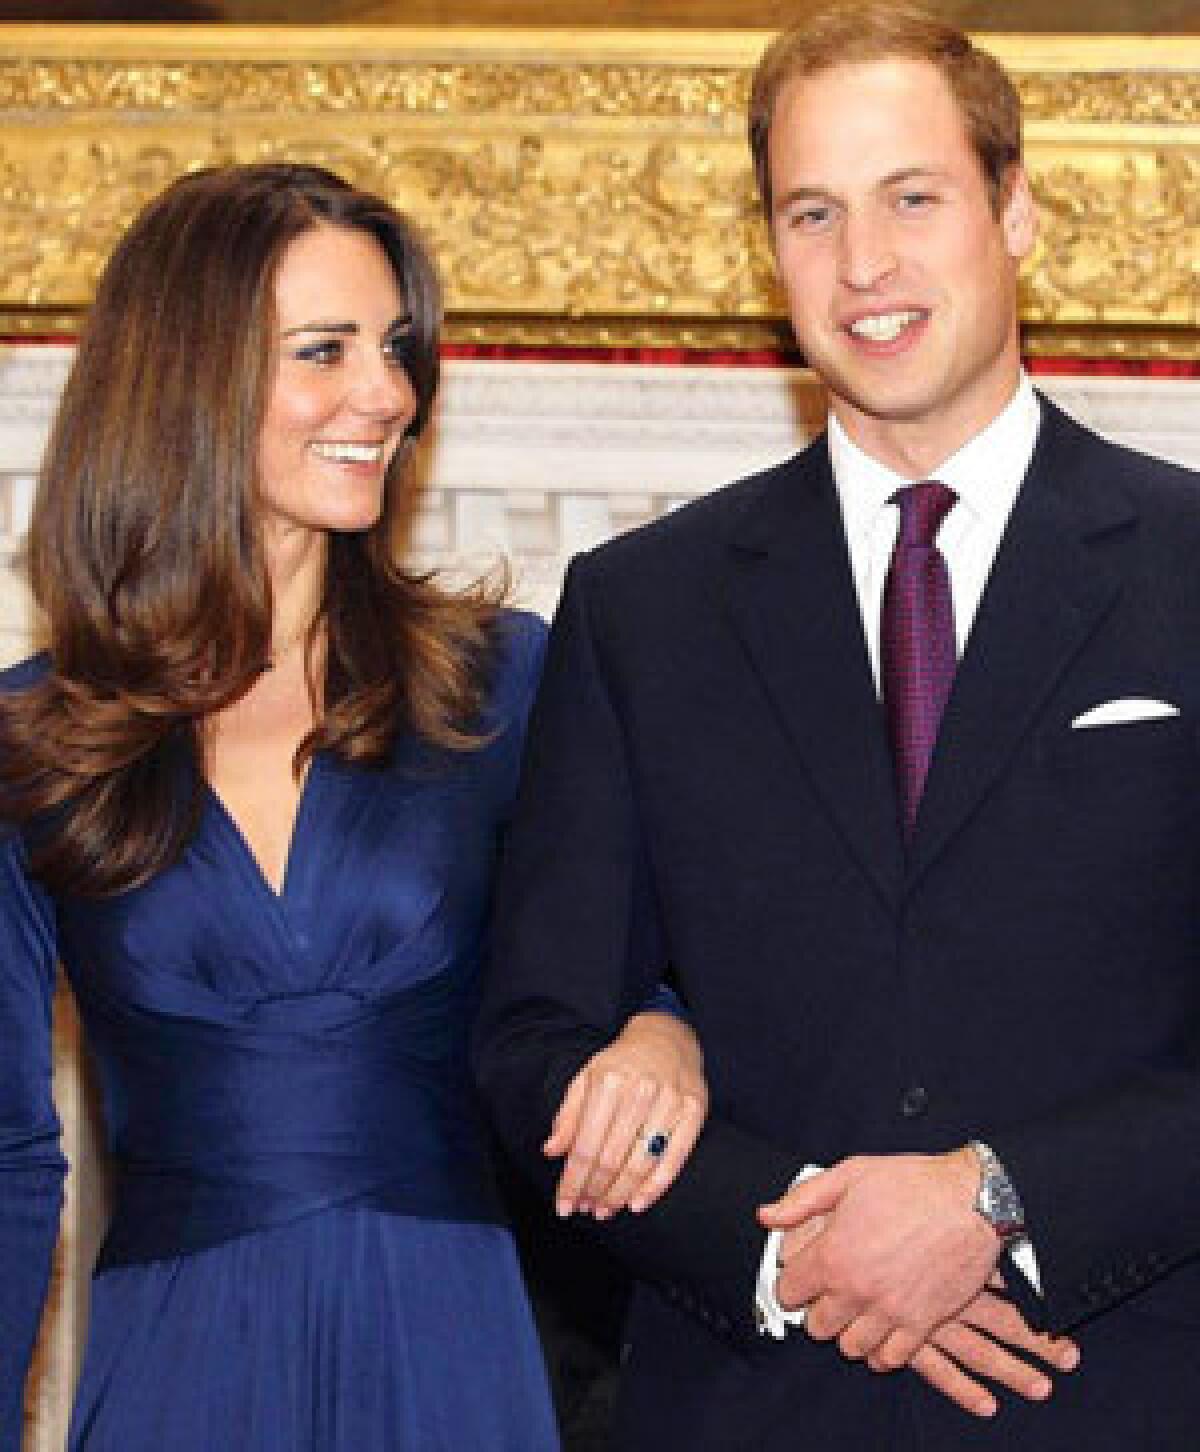 2011 will bring an interest in all things royal, including the planned marriage of Britain's Prince William and Kate Middleton.